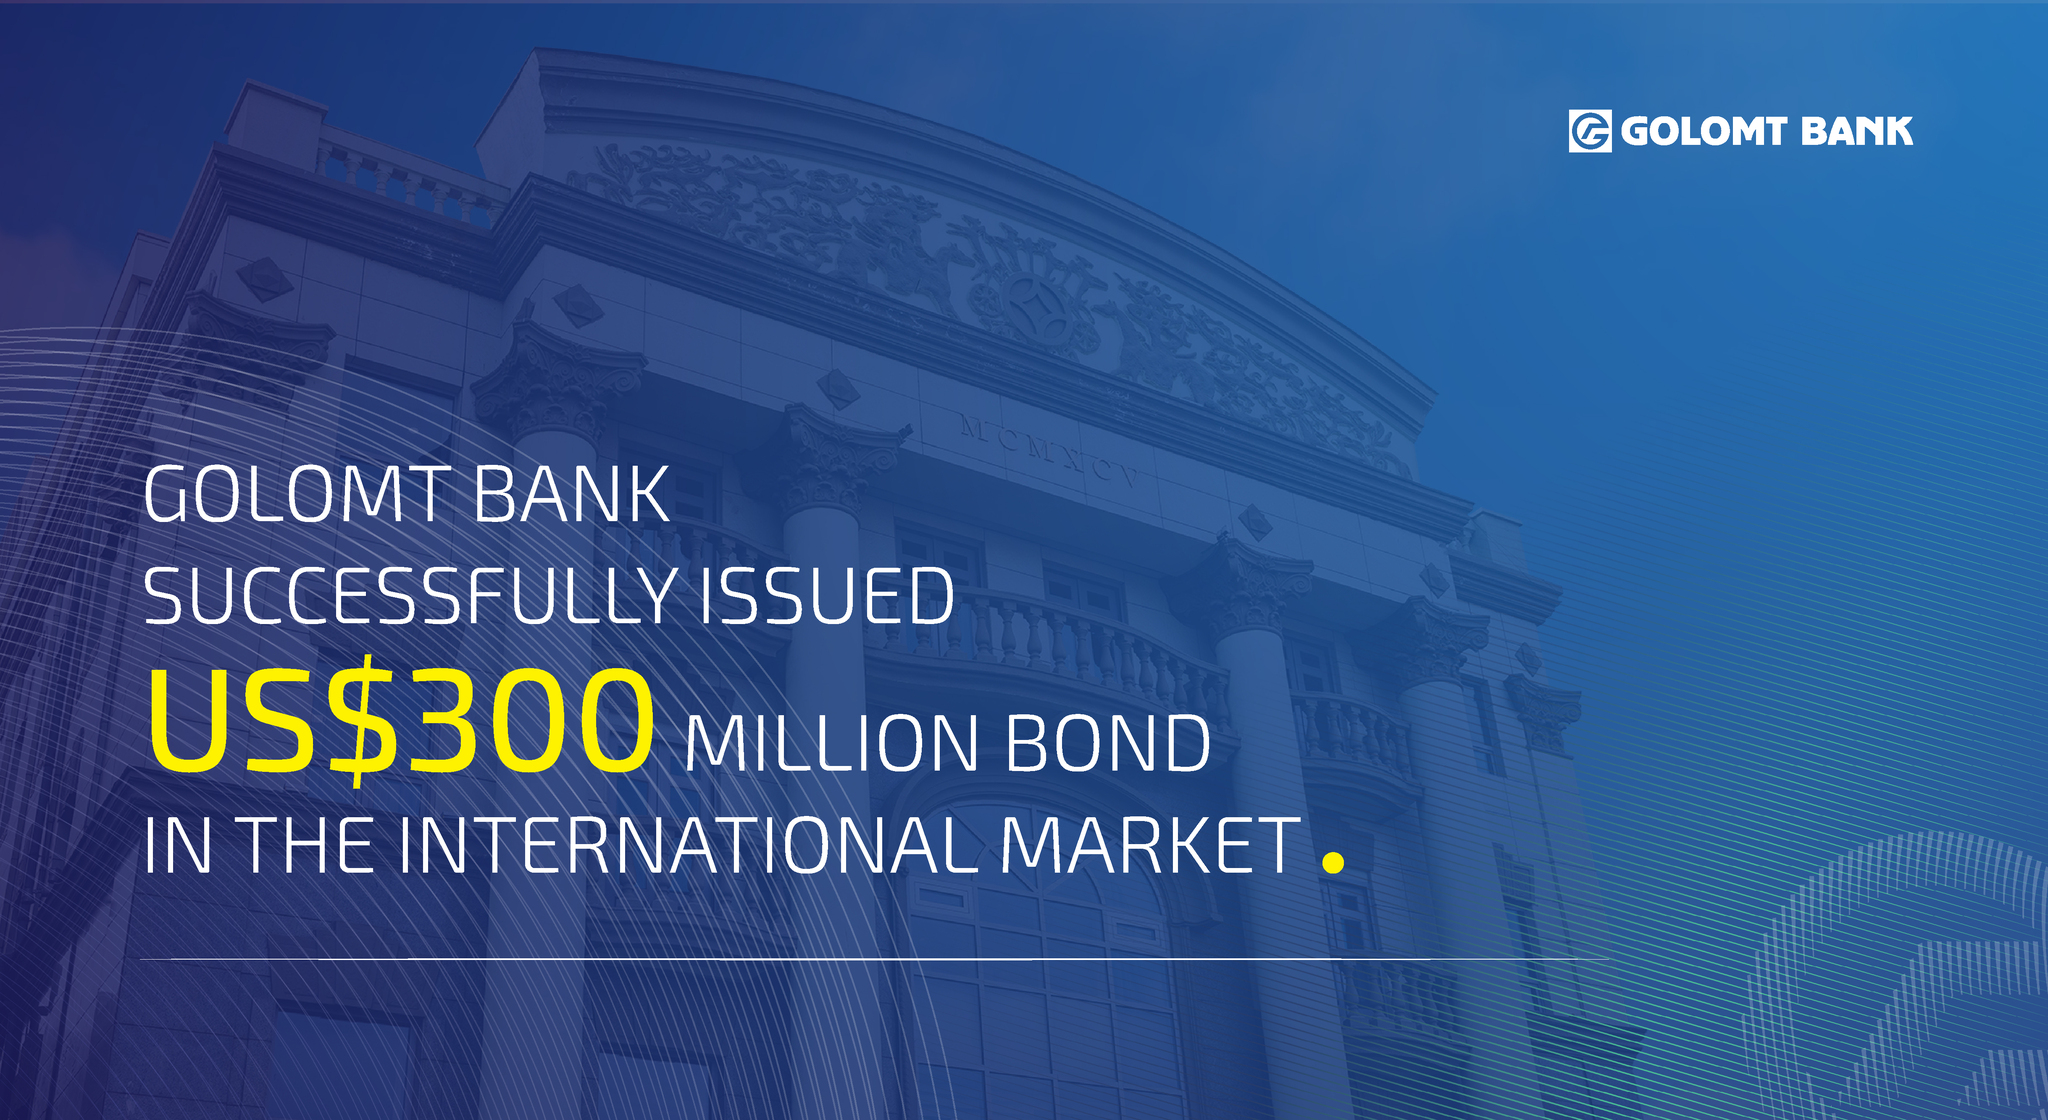 Golomt Bank successfully issued its inaugural US$ bond in the international market